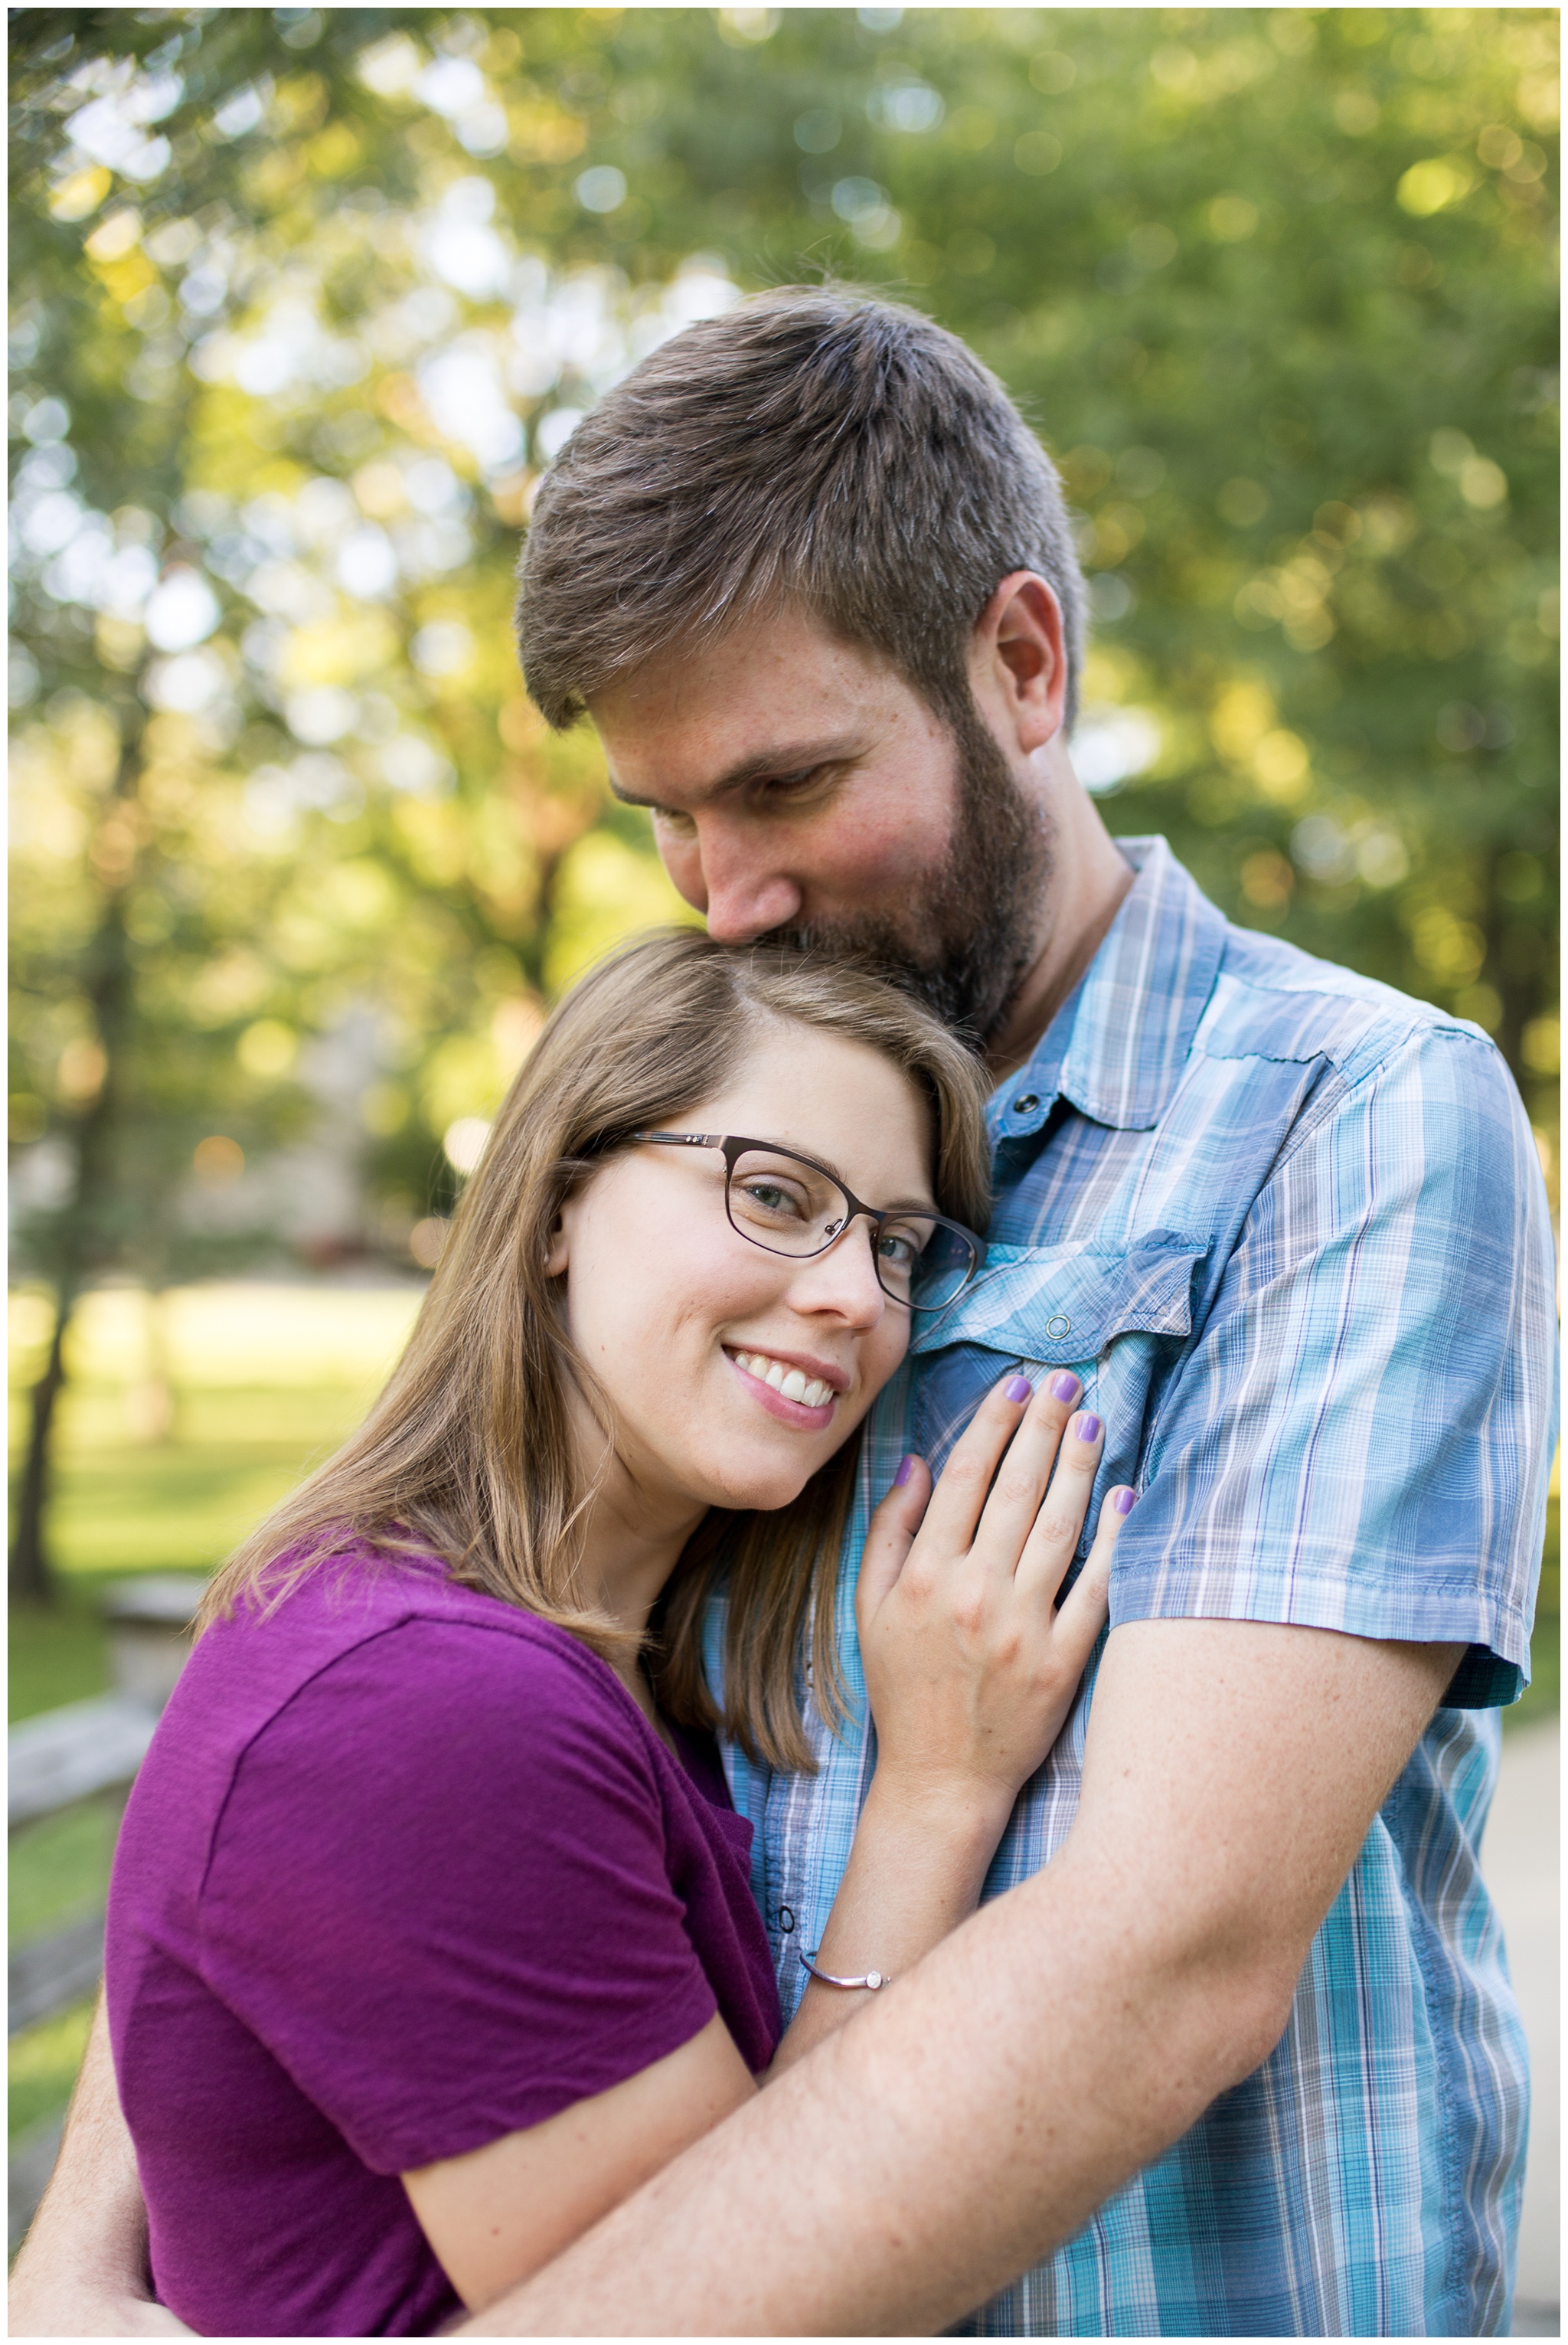 woodsy engagement session at Indiana University in Bloomington Indiana